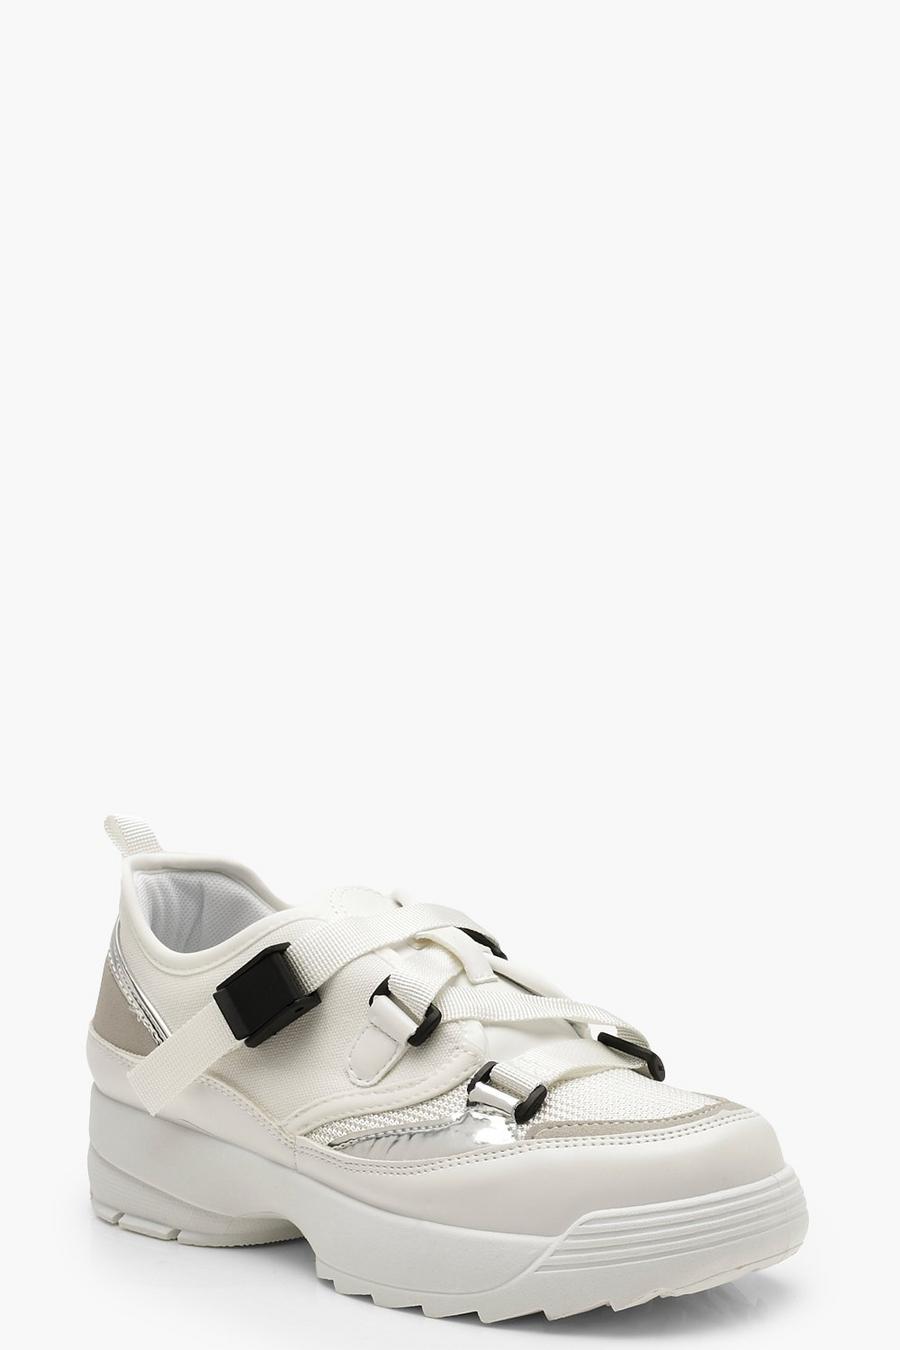 Buckle Strap Chunky Sole Sneakers image number 1